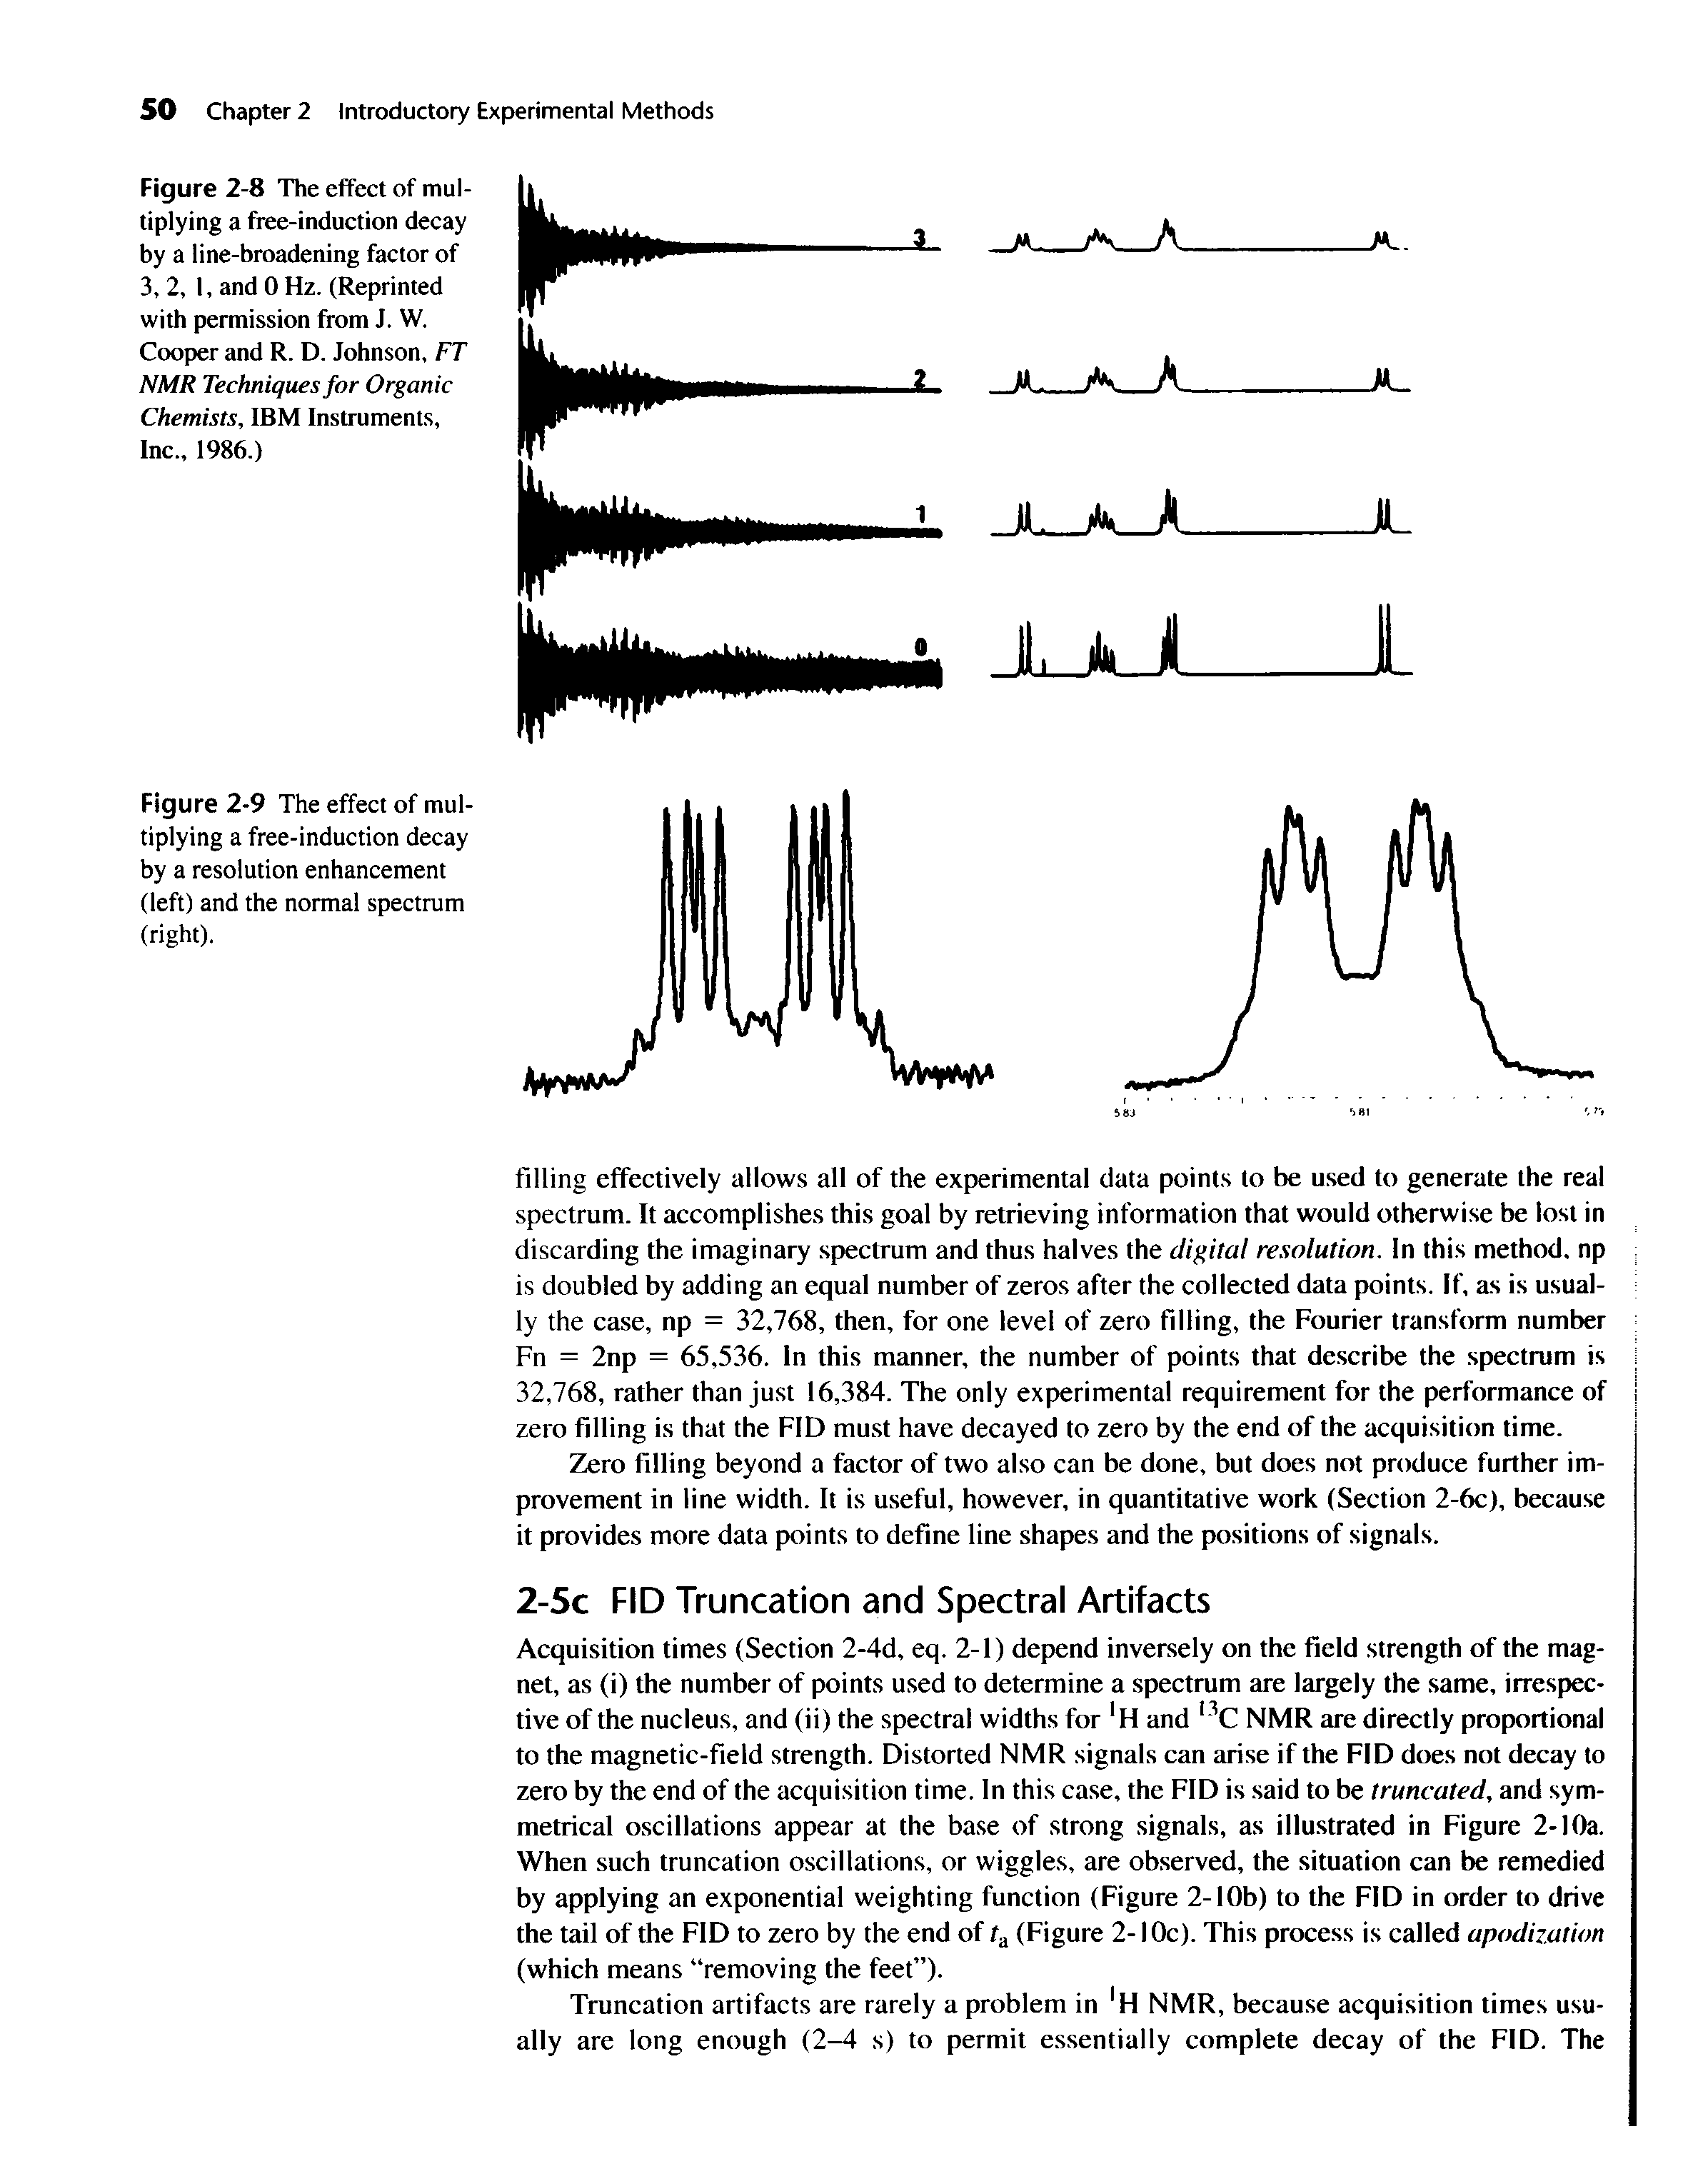 Figure 2-9 The effect of multiplying a free-induction decay by a resolution enhancement (left) and the normal spectrum (right).